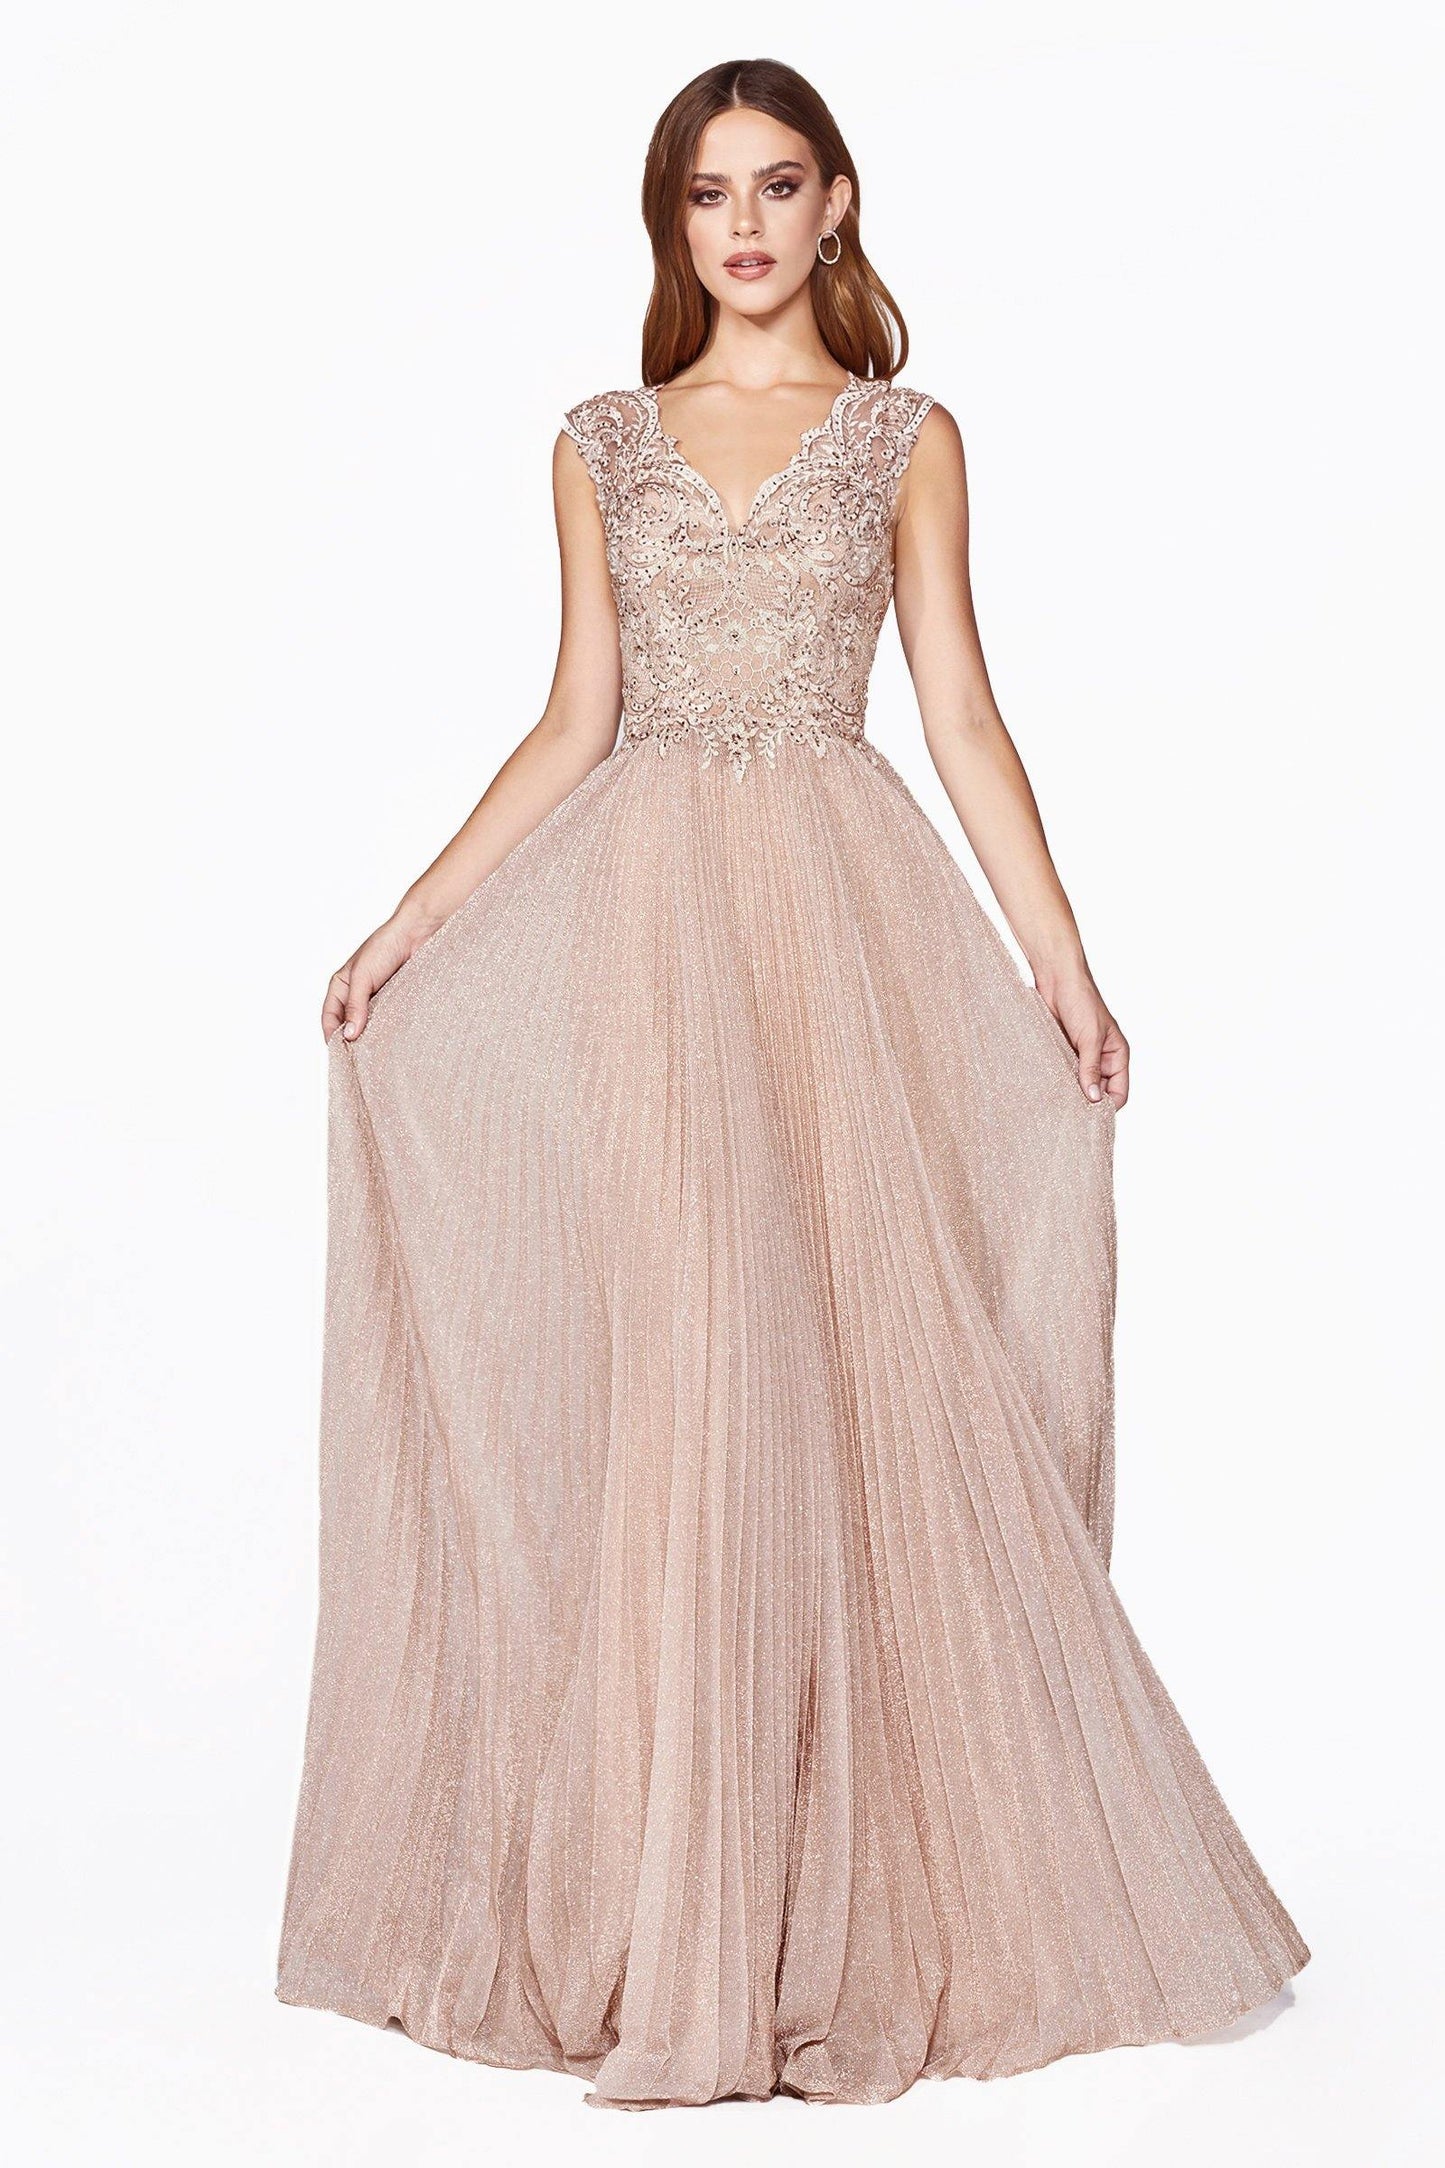 Long Formal Metallic Pleated Skirt Evening Prom Dress - The Dress Outlet Cinderella Divine